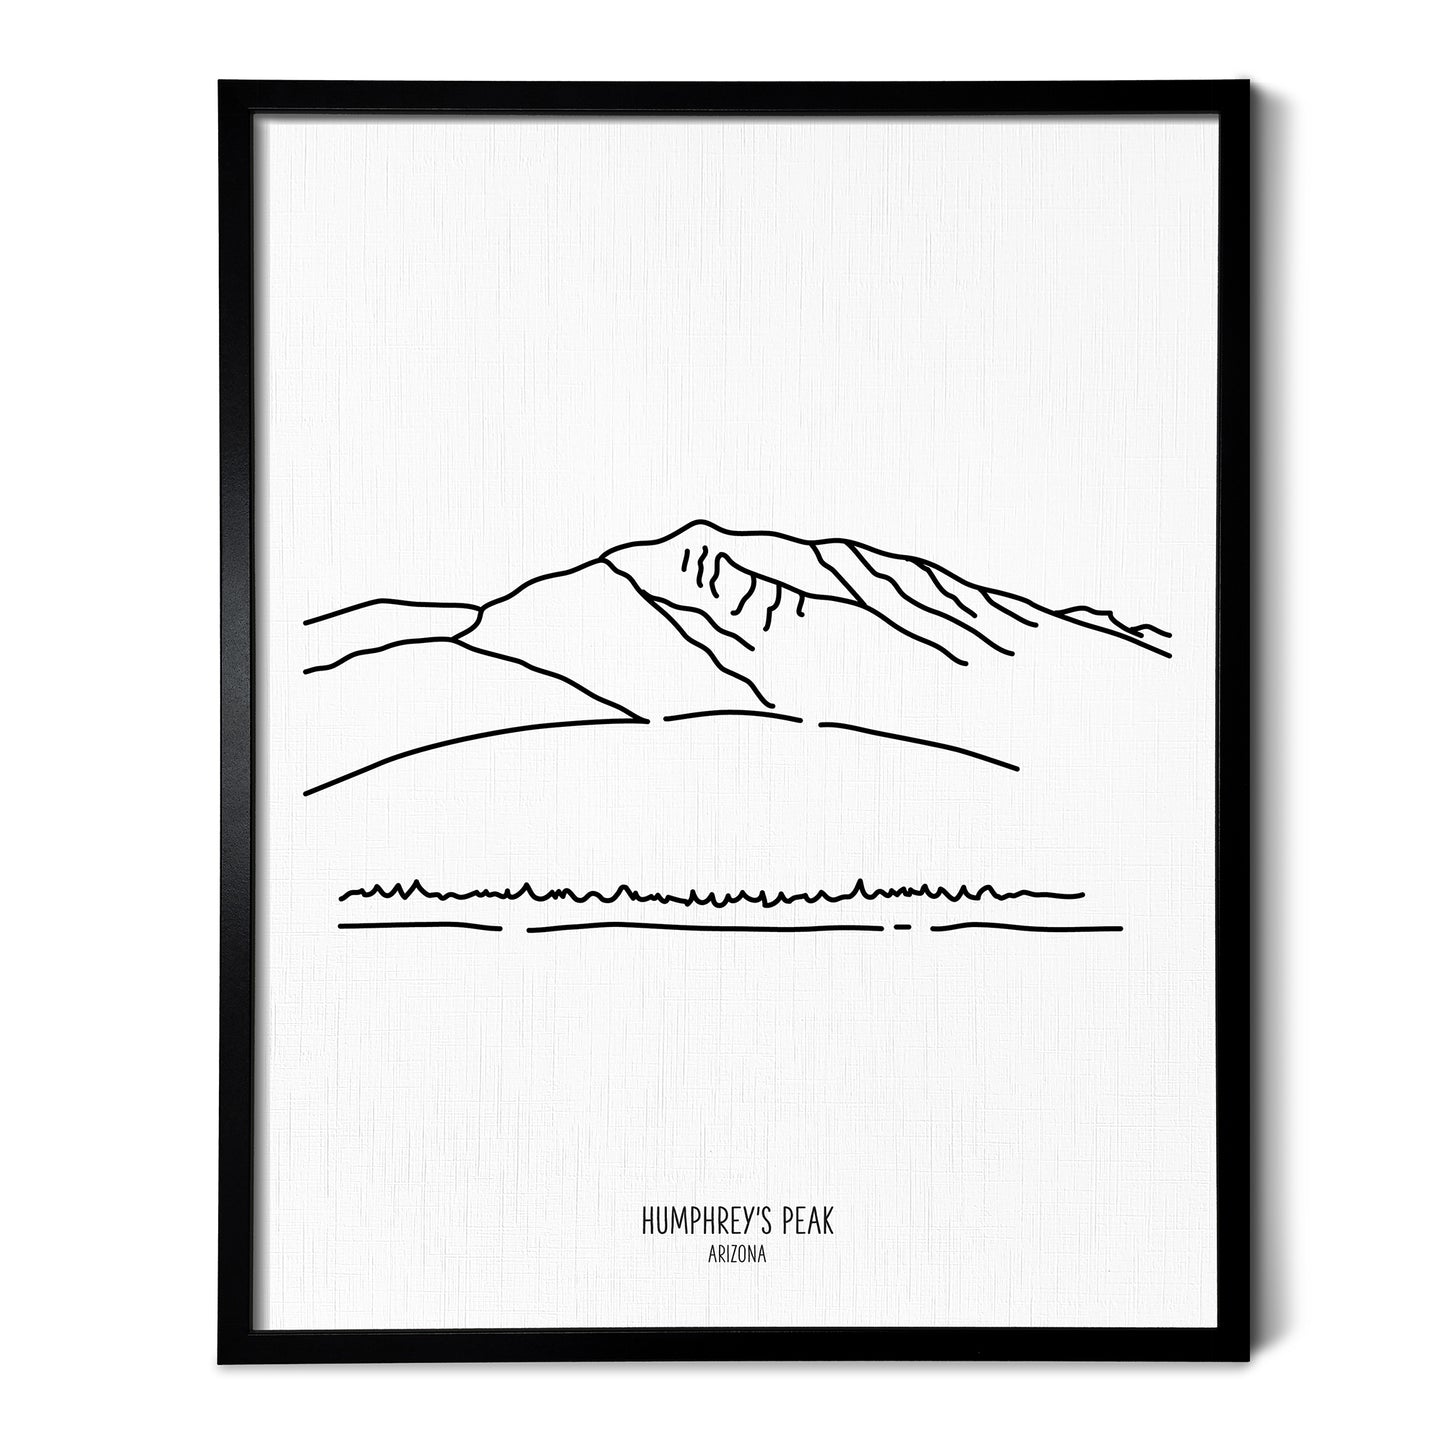 A line art drawing of Humphrey's Peak in Arizona on white linen paper in a thin black picture frame